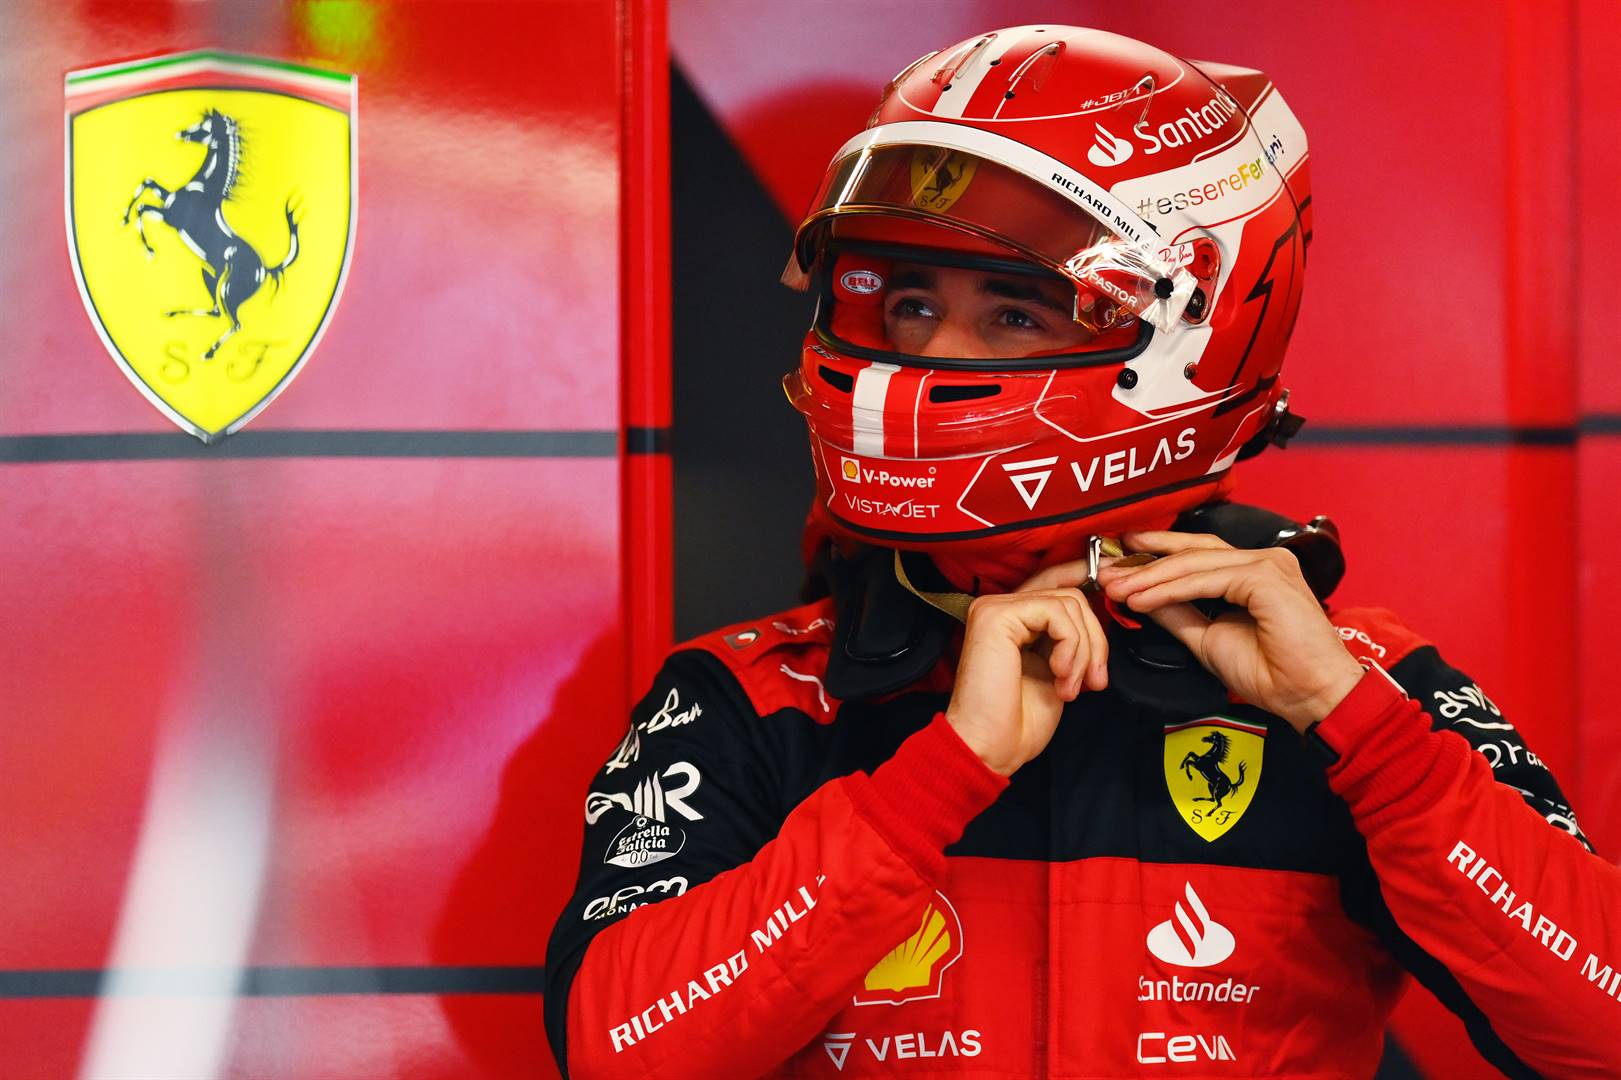 Ferrari driver Charles Leclerc strapping up during practice ahead of the Canadian Grand Prix in Montreal. Photo: Dan Mullan/Getty Images